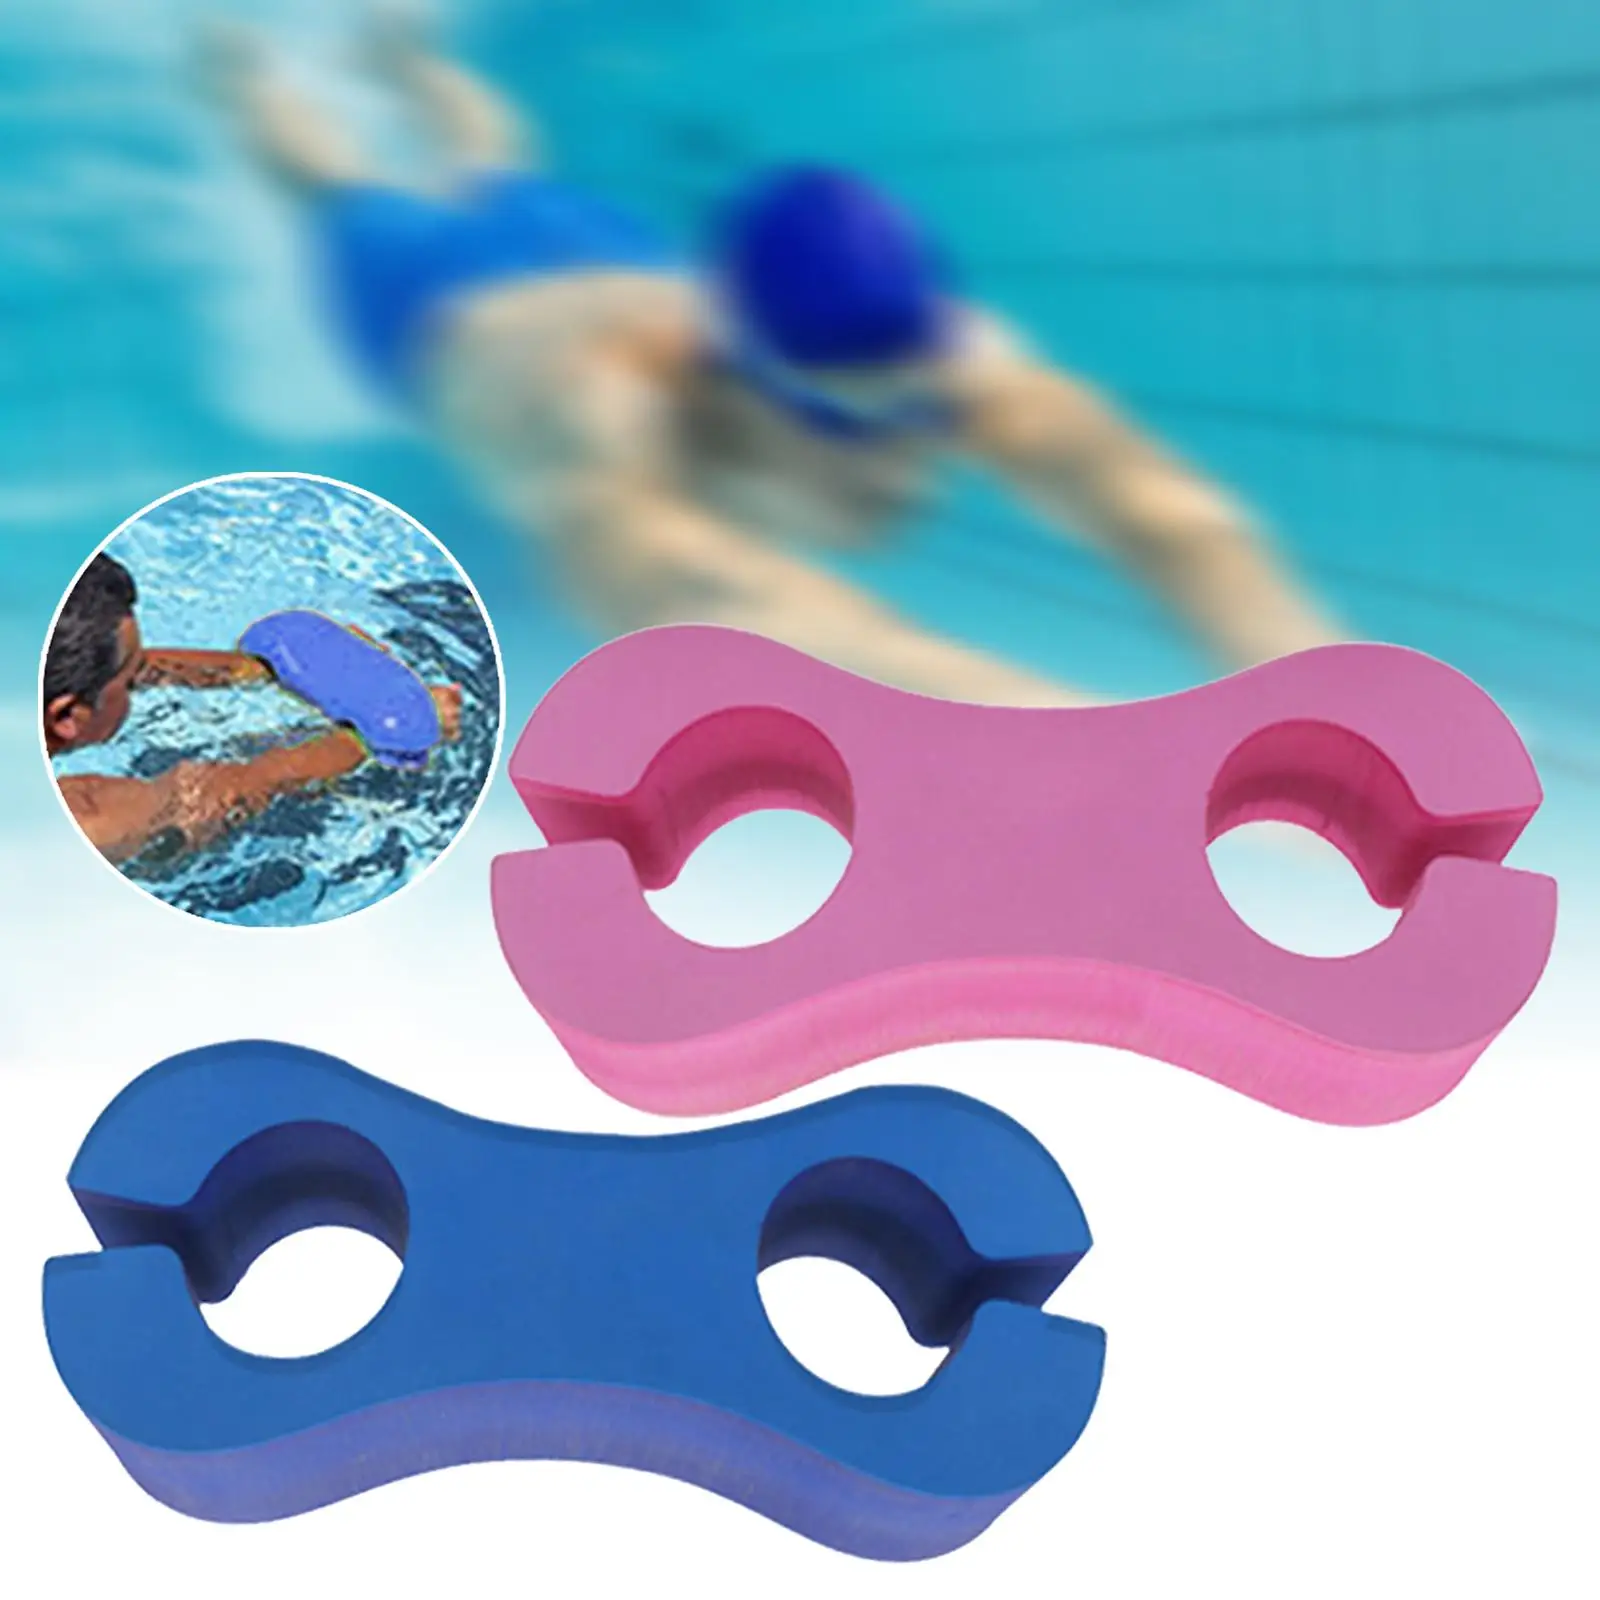 Pull Buoy Float Buoyancy Legs and Hips Support for Pool Gear Aquatic Fitness